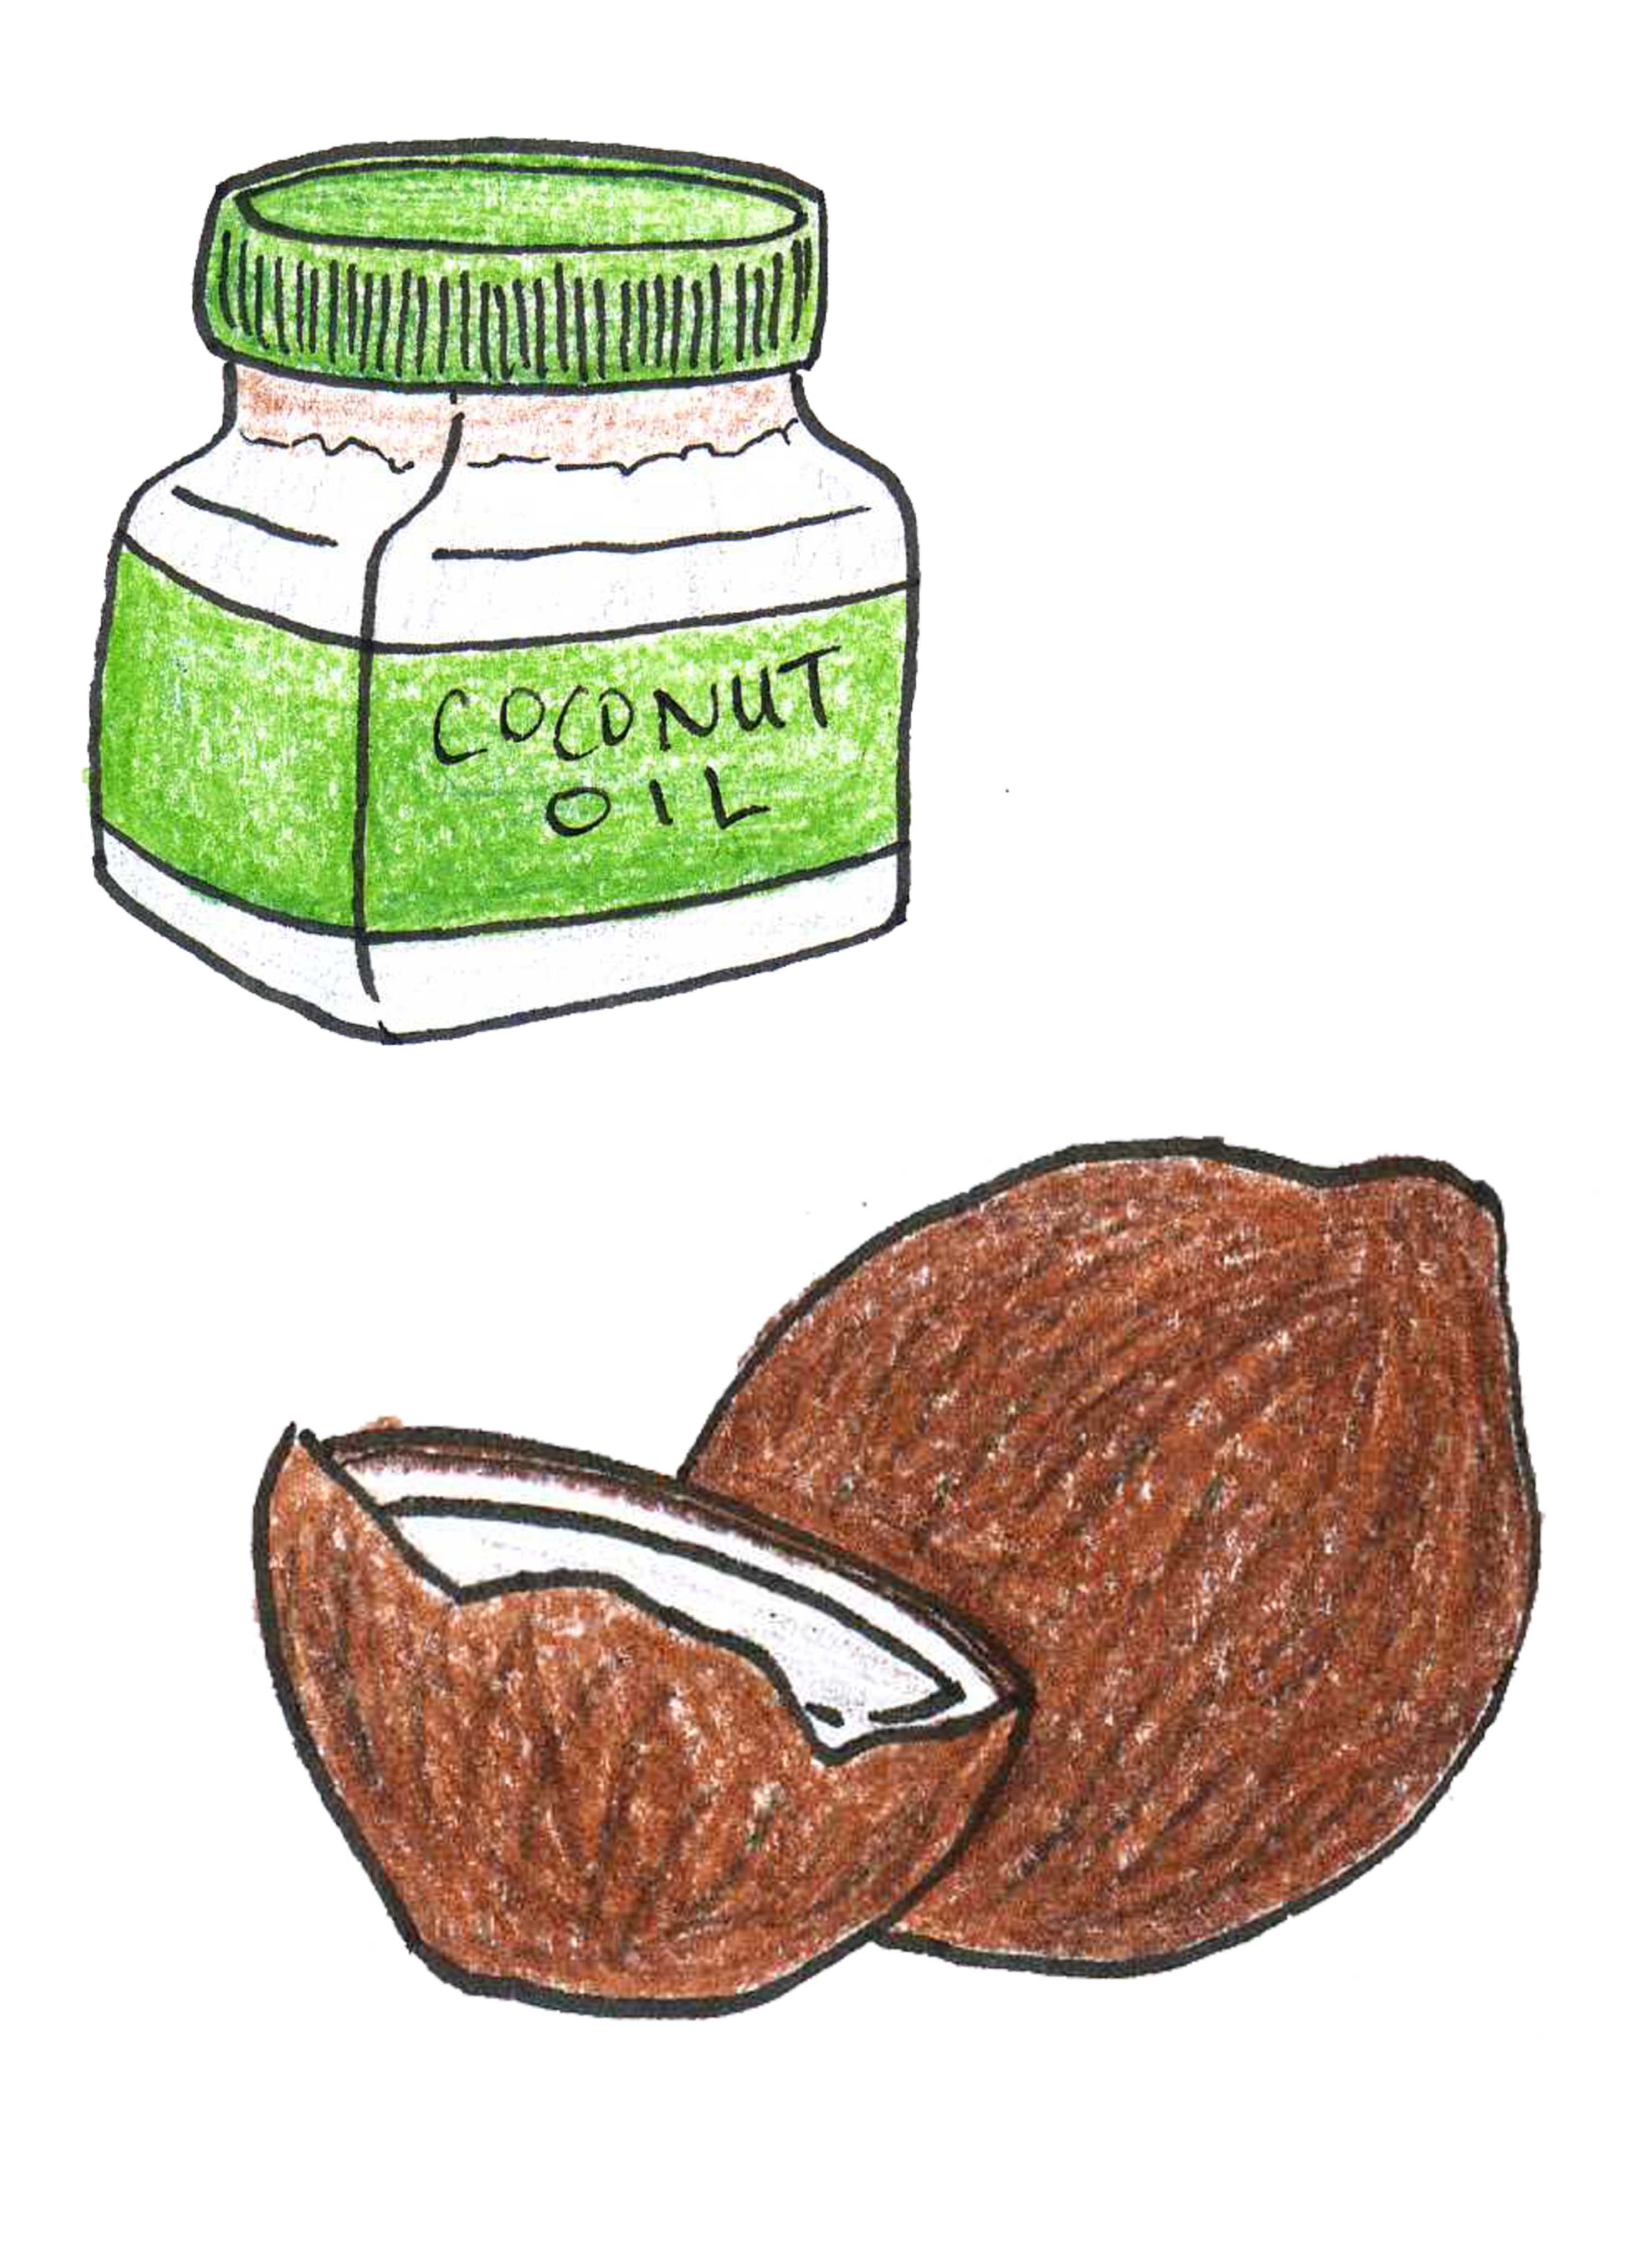 Go nuts for coconut oil